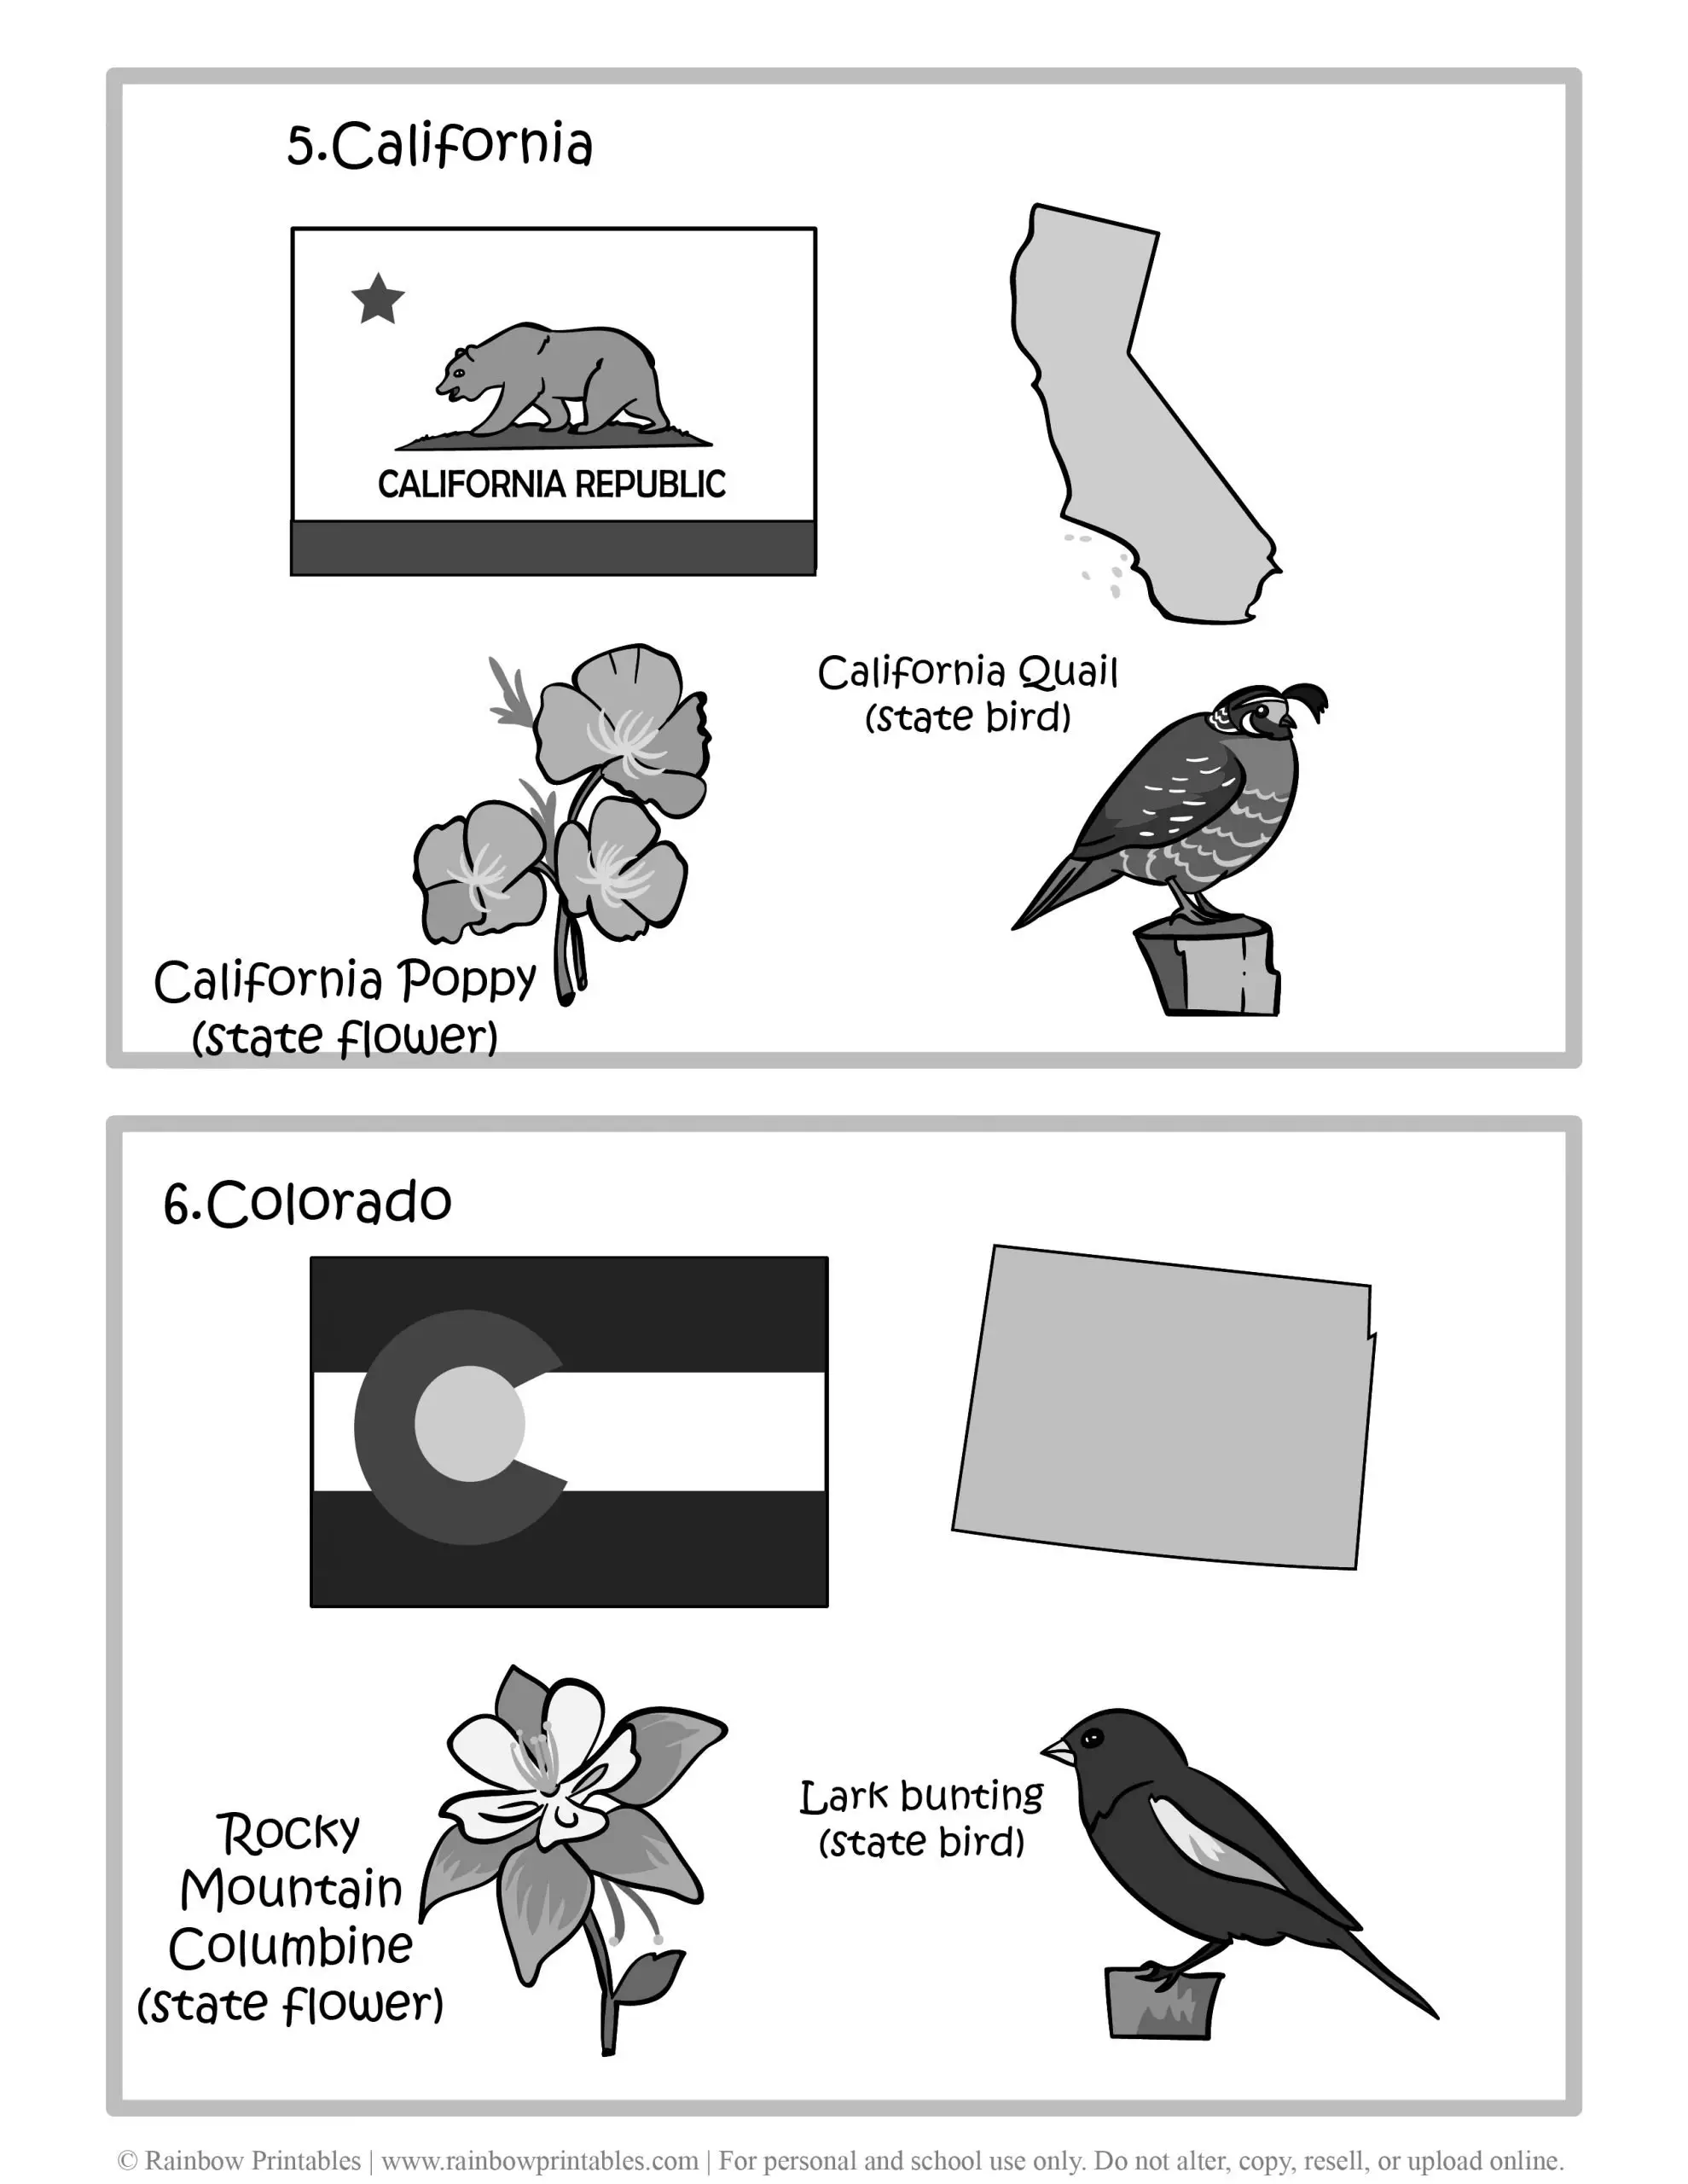 California, Colorado, 50 US State Flag, State Bird, State Flower, United States of America - American States Geography Worksheet Class Lesson Printables Flashcards Black White